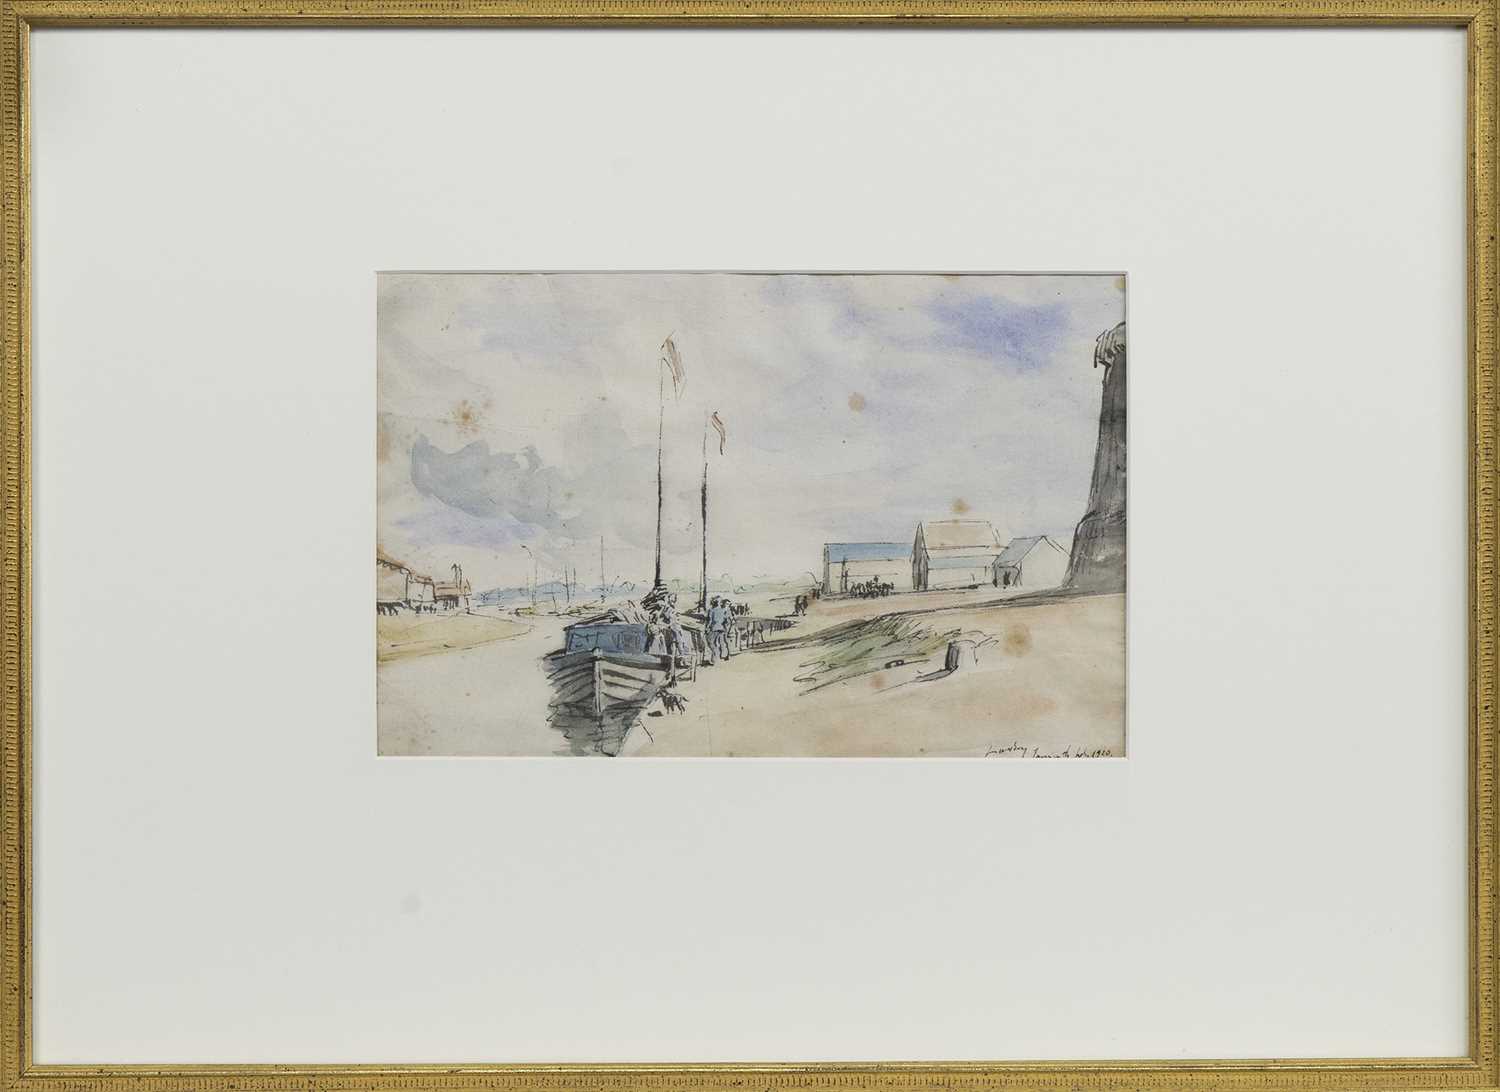 YACHT STATION, YARMOUTH, A WATERCOLOUR BY JAMES MCBEY